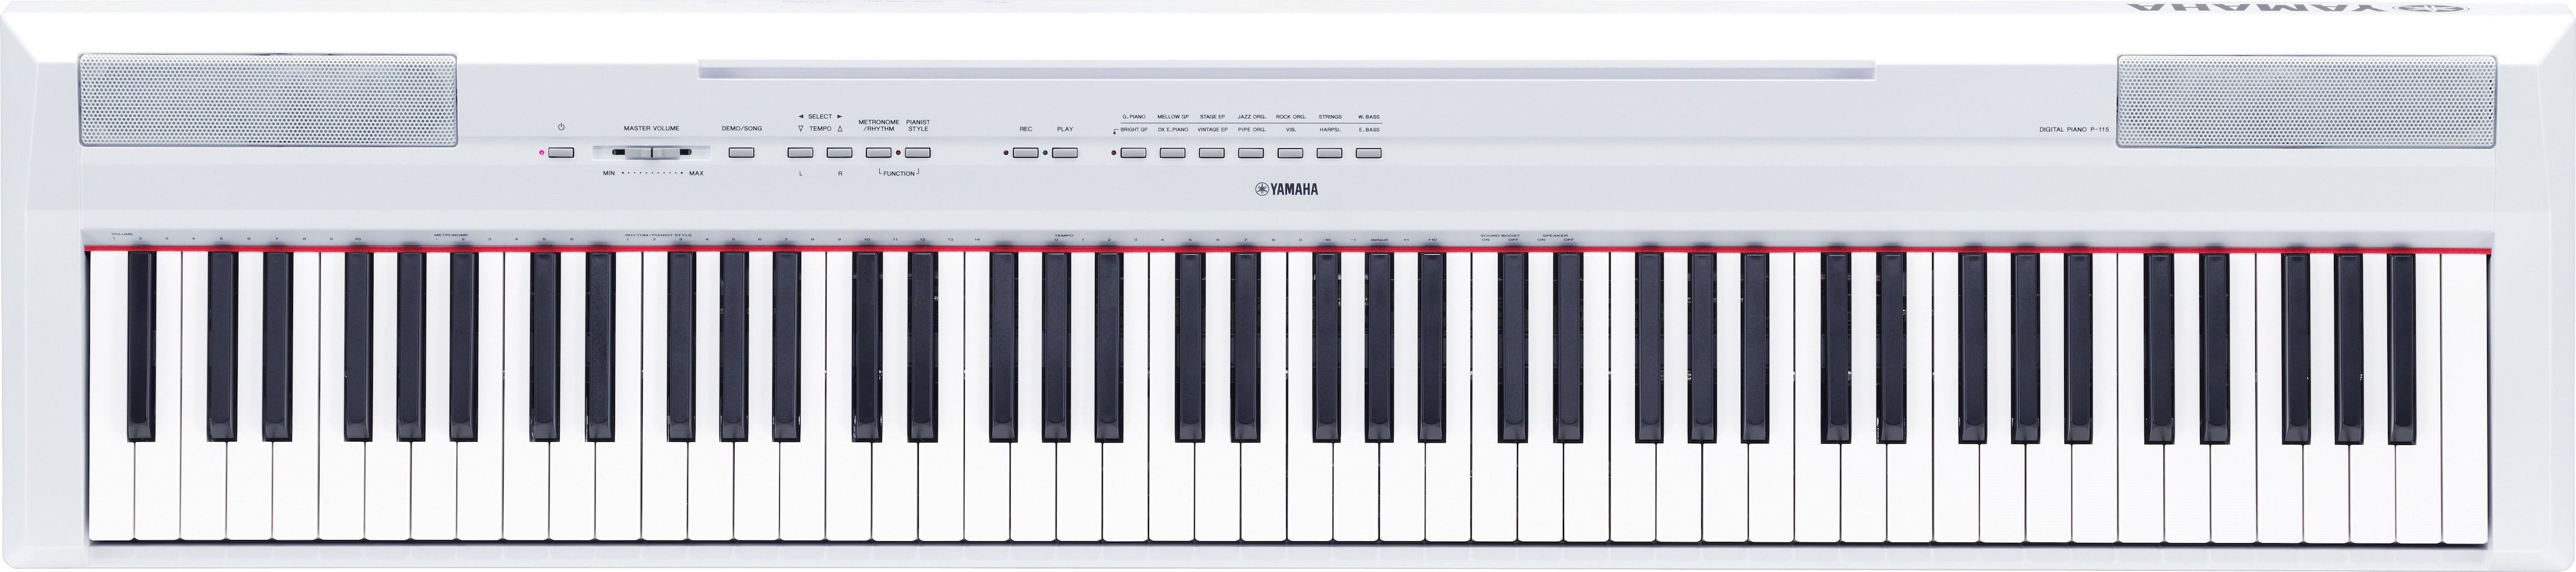 P-115 - Overview - P Series - Pianos - Musical Instruments 